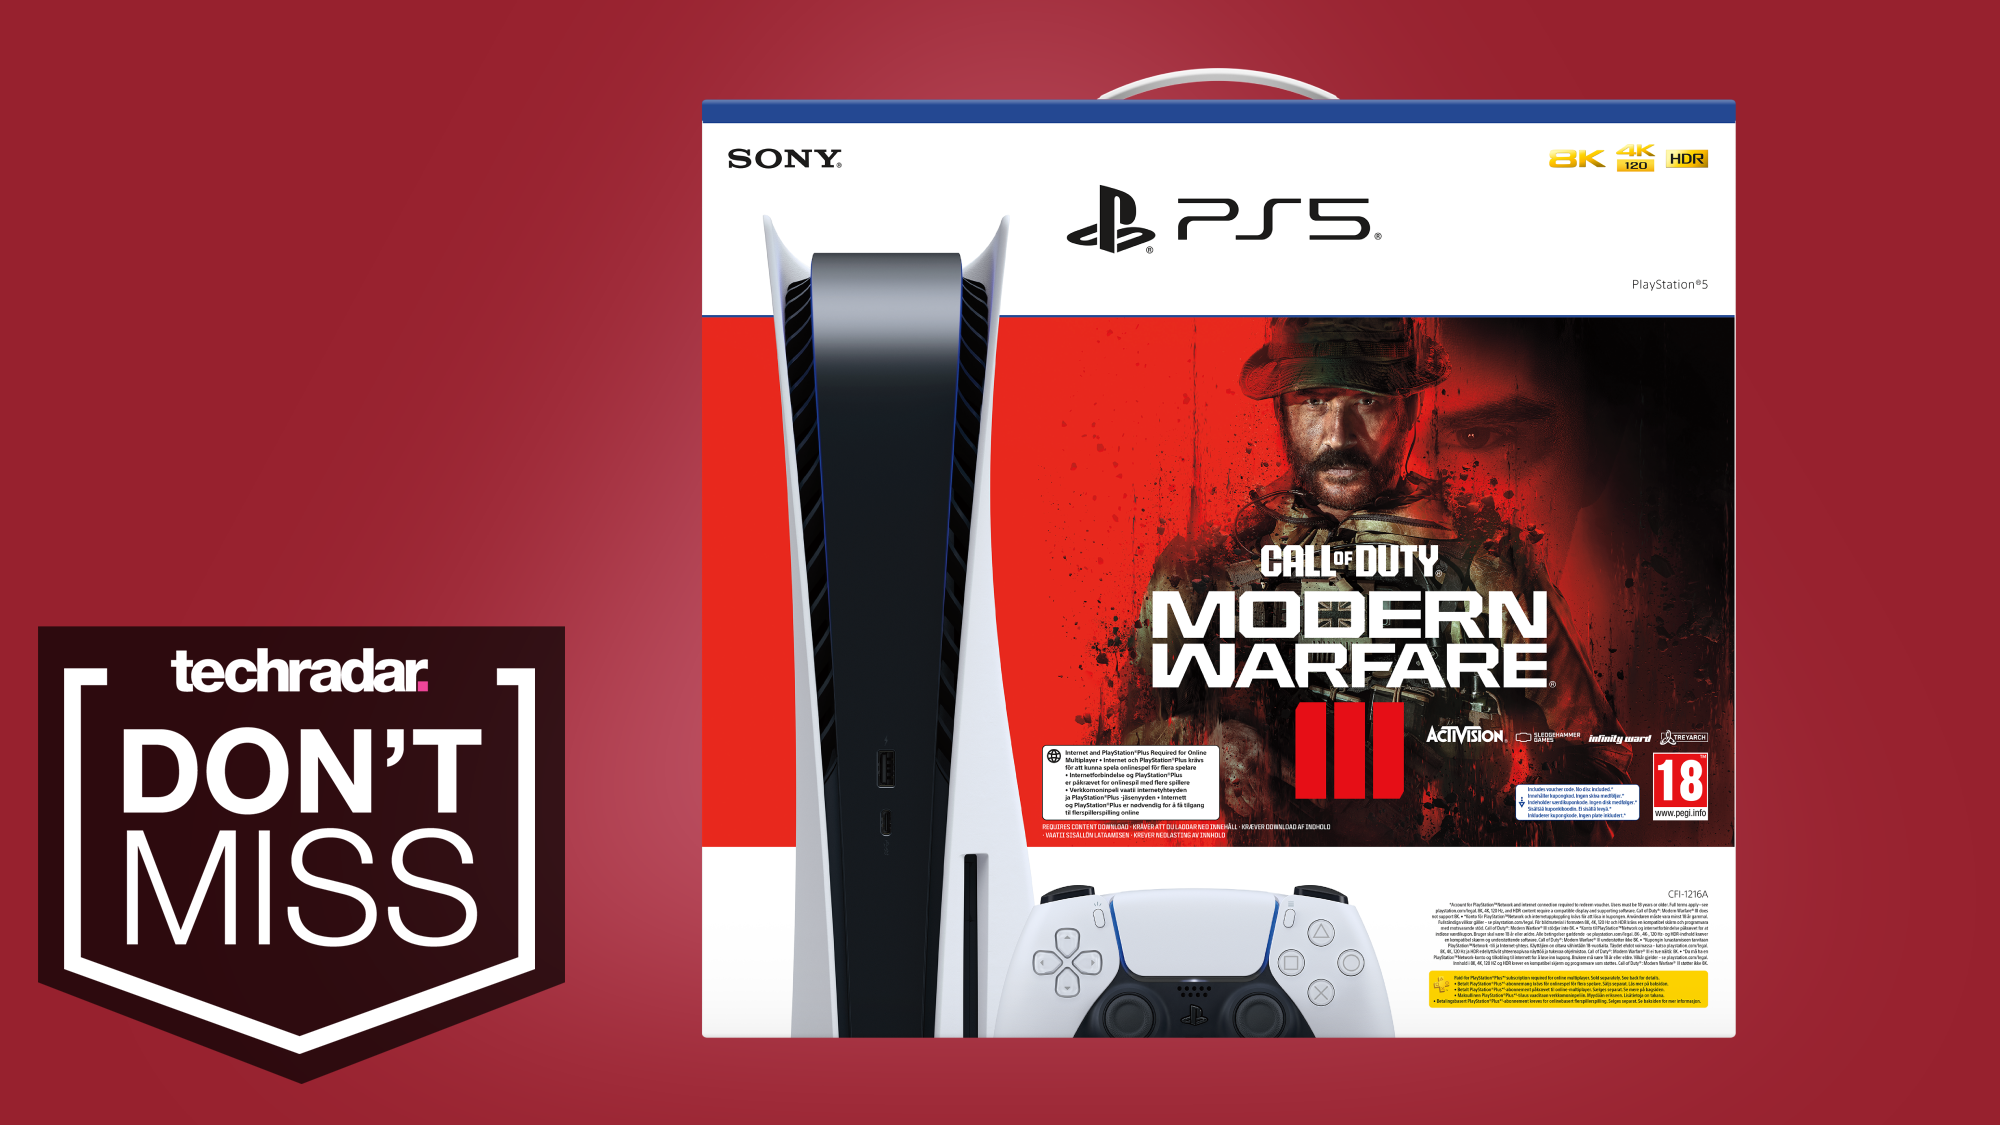 Fight like never before on PS5. Buy the PS5 Call of Duty: Modern Warfare III  Bundle from participating retailers : ShopatSC, …